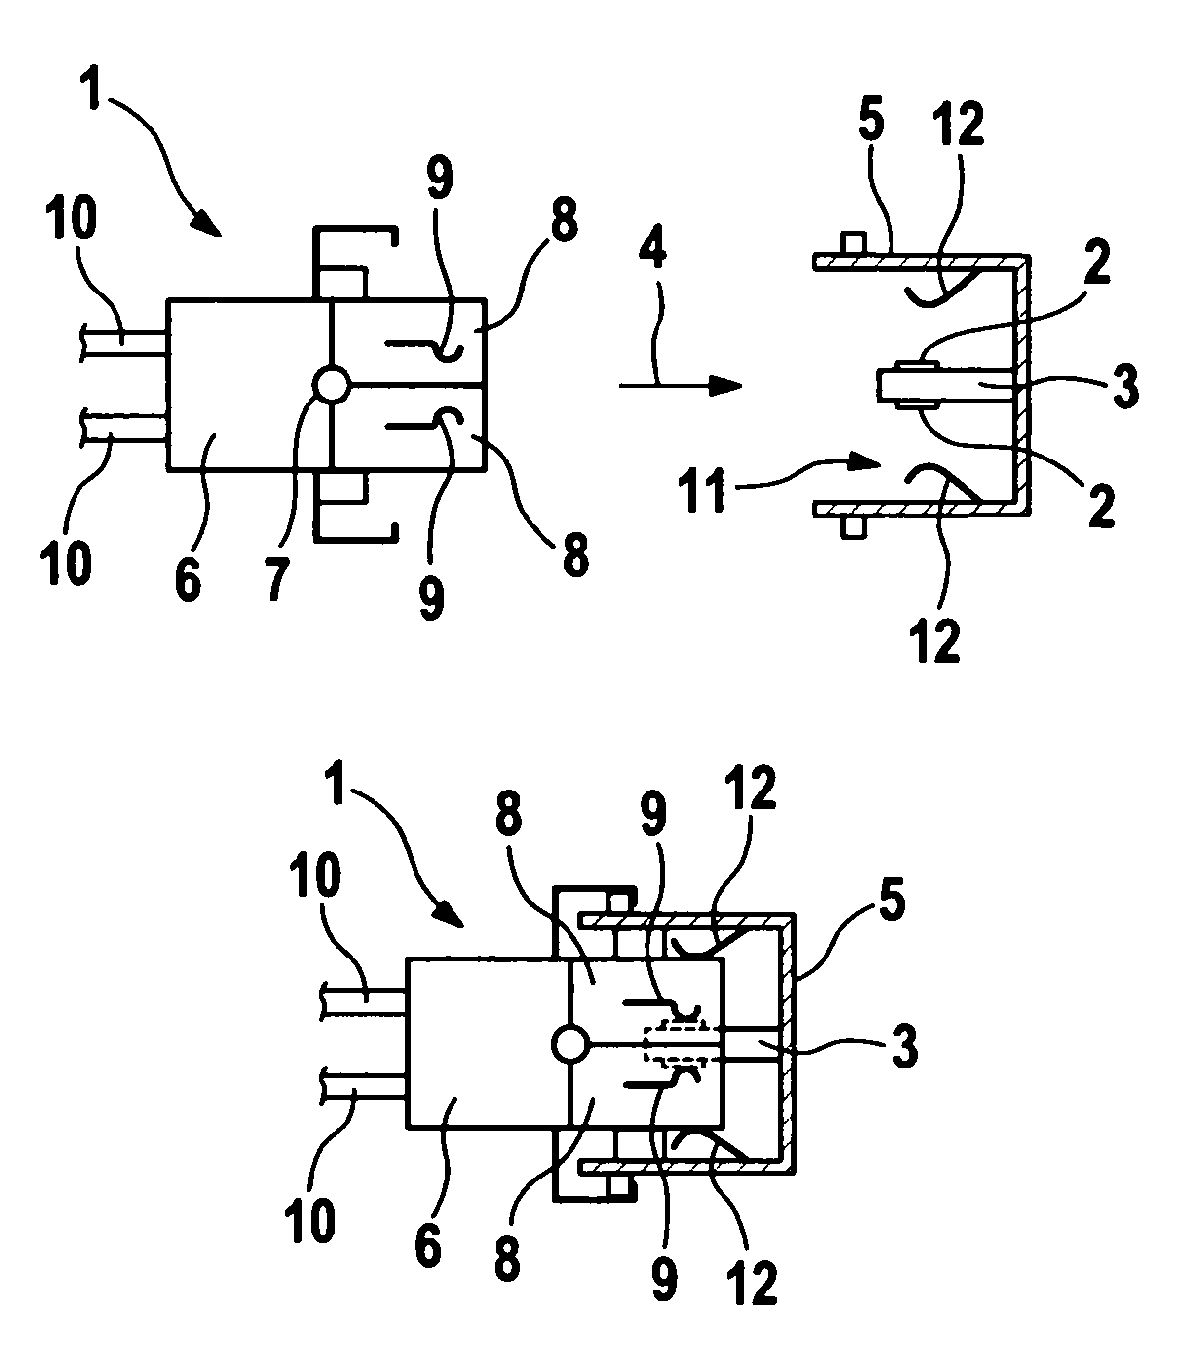 Plug connection for the direct electrical contacting of a circuit board